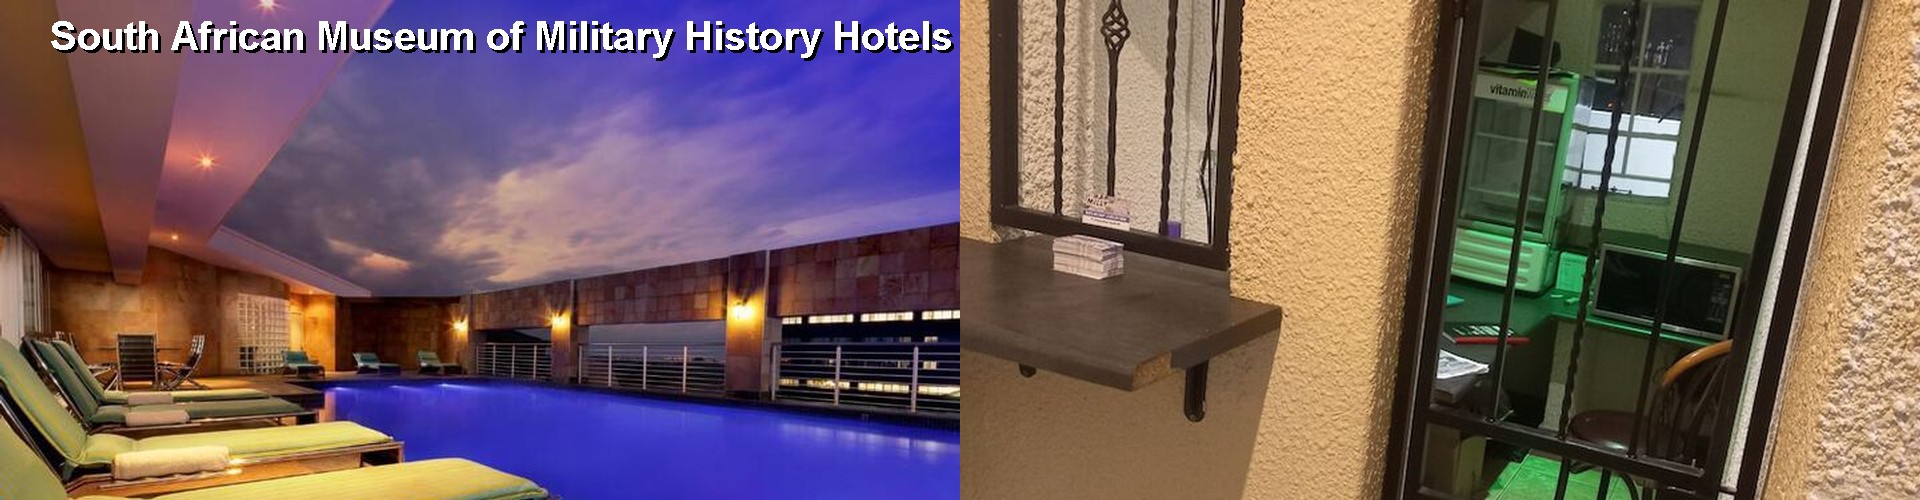 5 Best Hotels near South African Museum of Military History